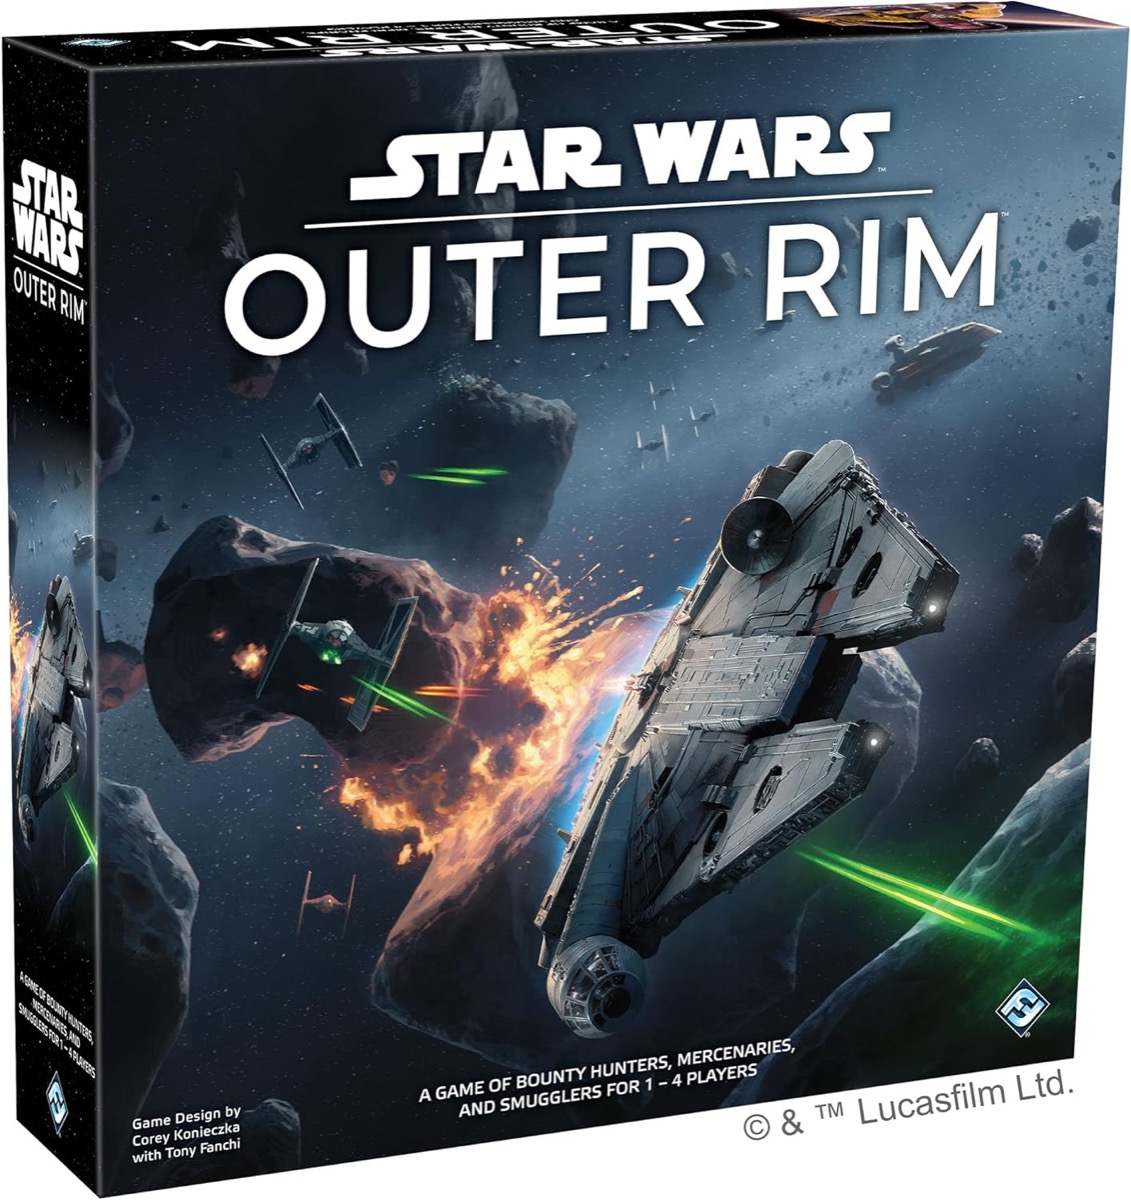 A box depicting a space battle for Star Wars Outer Rim